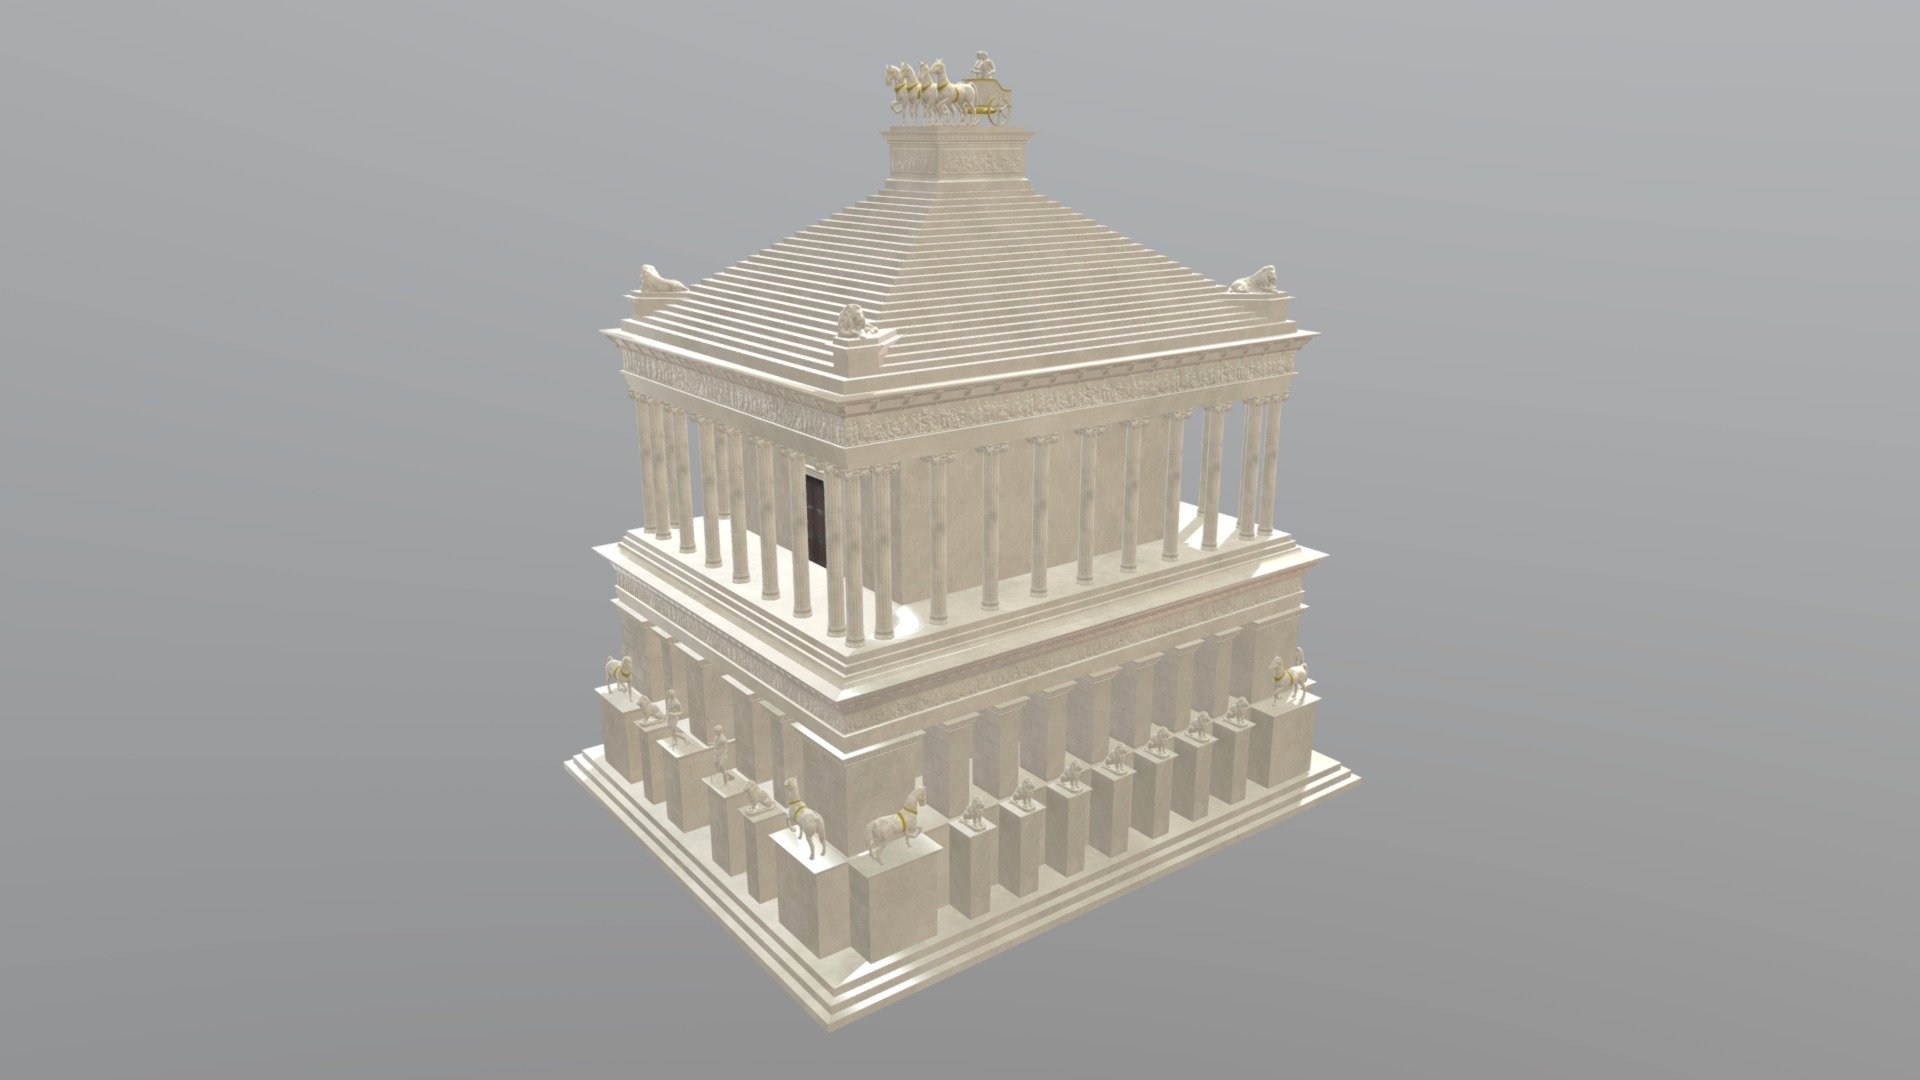 Mausoleum at Halicarnassus

file format




3ds max 2017

obj (multi Format)

FBX (multi Format)

included RAR archive with textures and *.obj file for the Unity and Vray

Total number of polygons in the scene: Tris: 83229 Vertices: 48996

I will be happy if you like it 3d model! See my other 3d models, just click on my user name 3d model